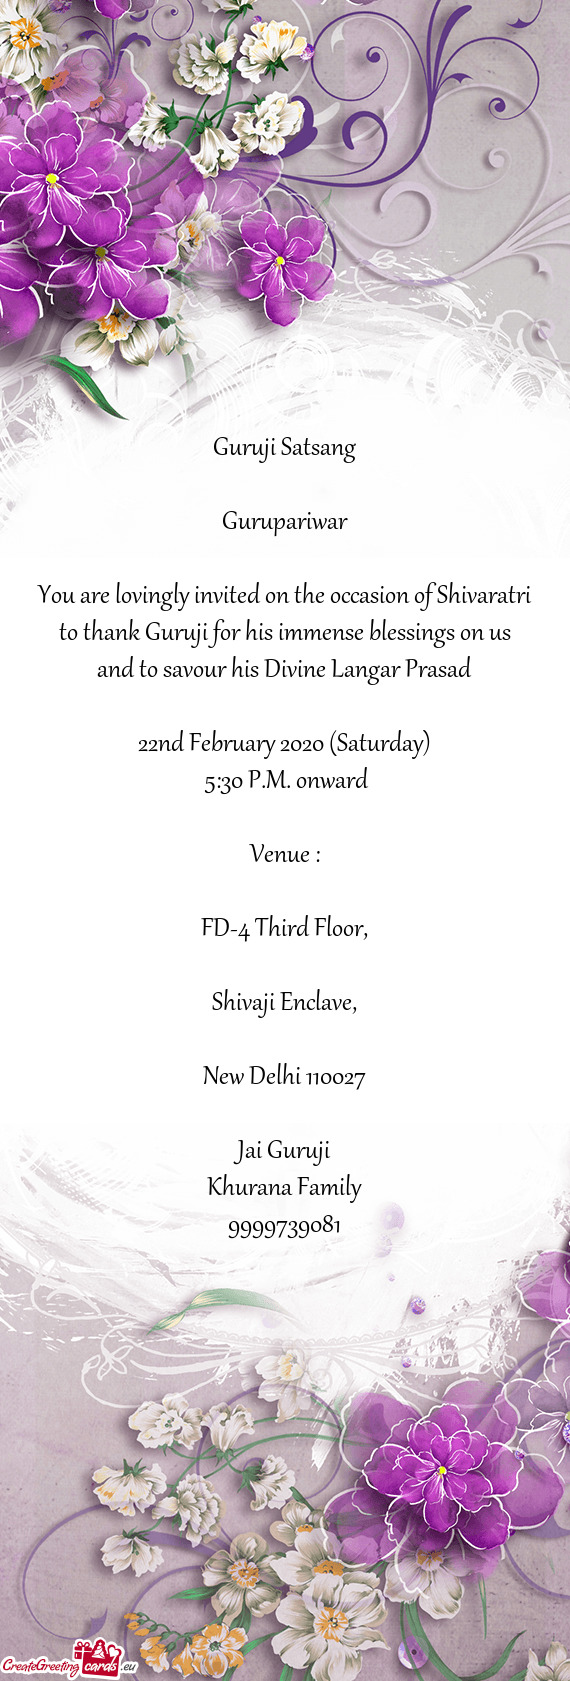 You are lovingly invited on the occasion of Shivaratri